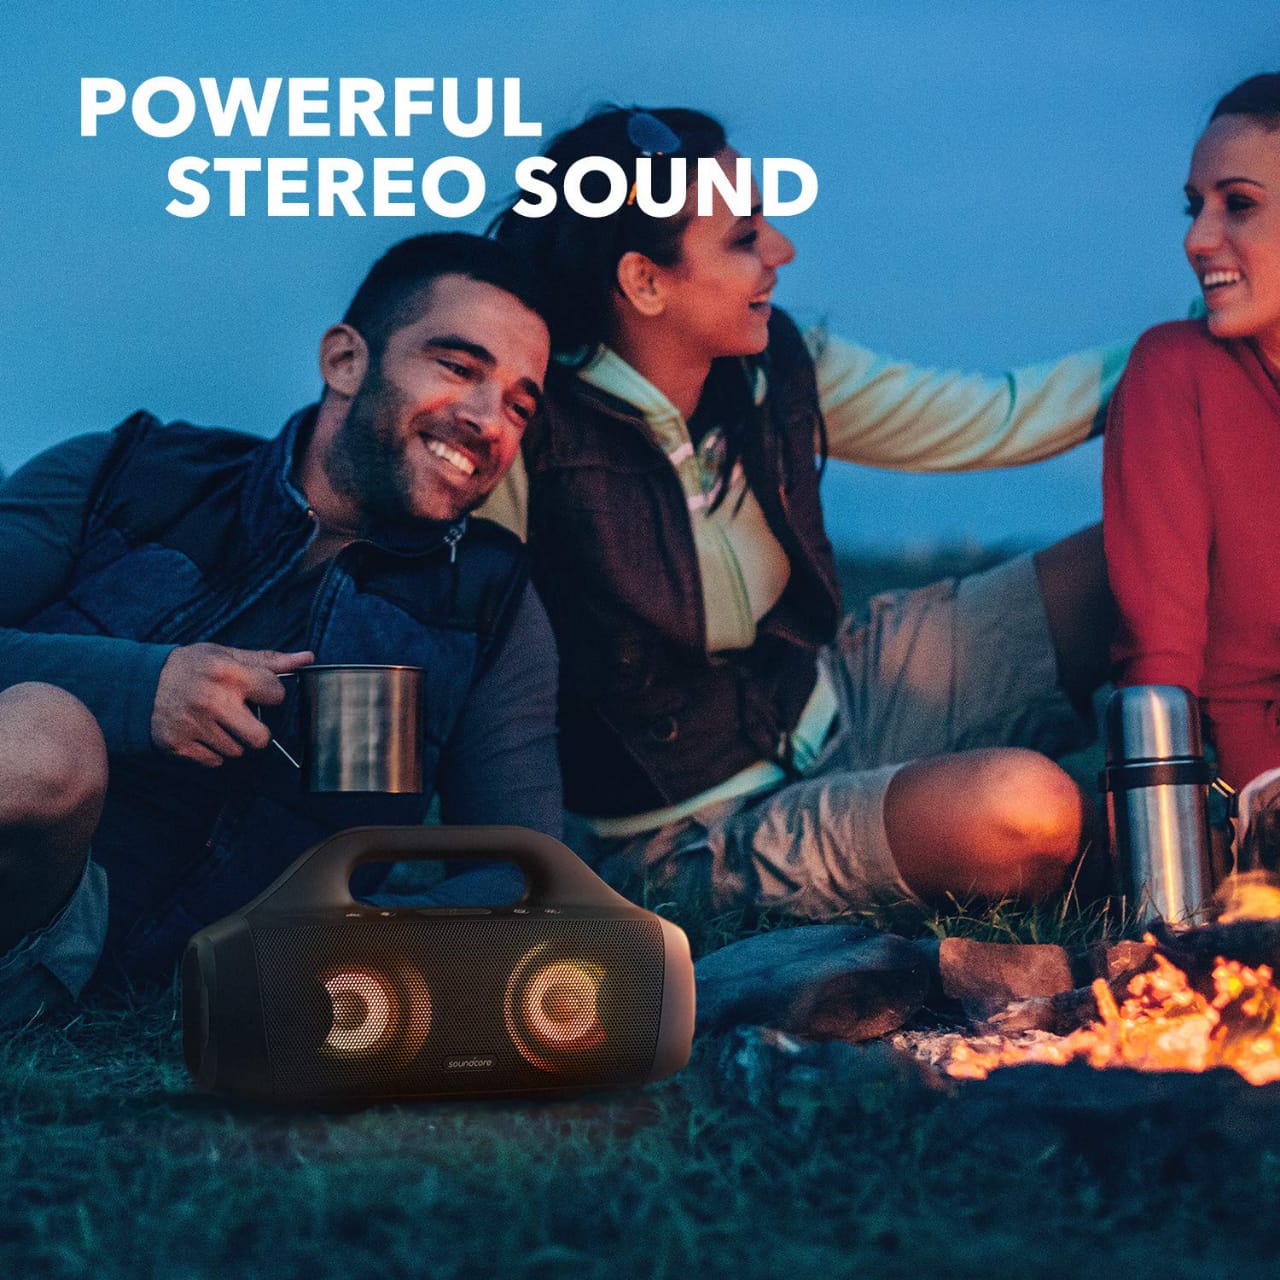 A Gang Enjoys Music From ANKER Soundcore SELECT PRO Portable Waterproof Speaker.